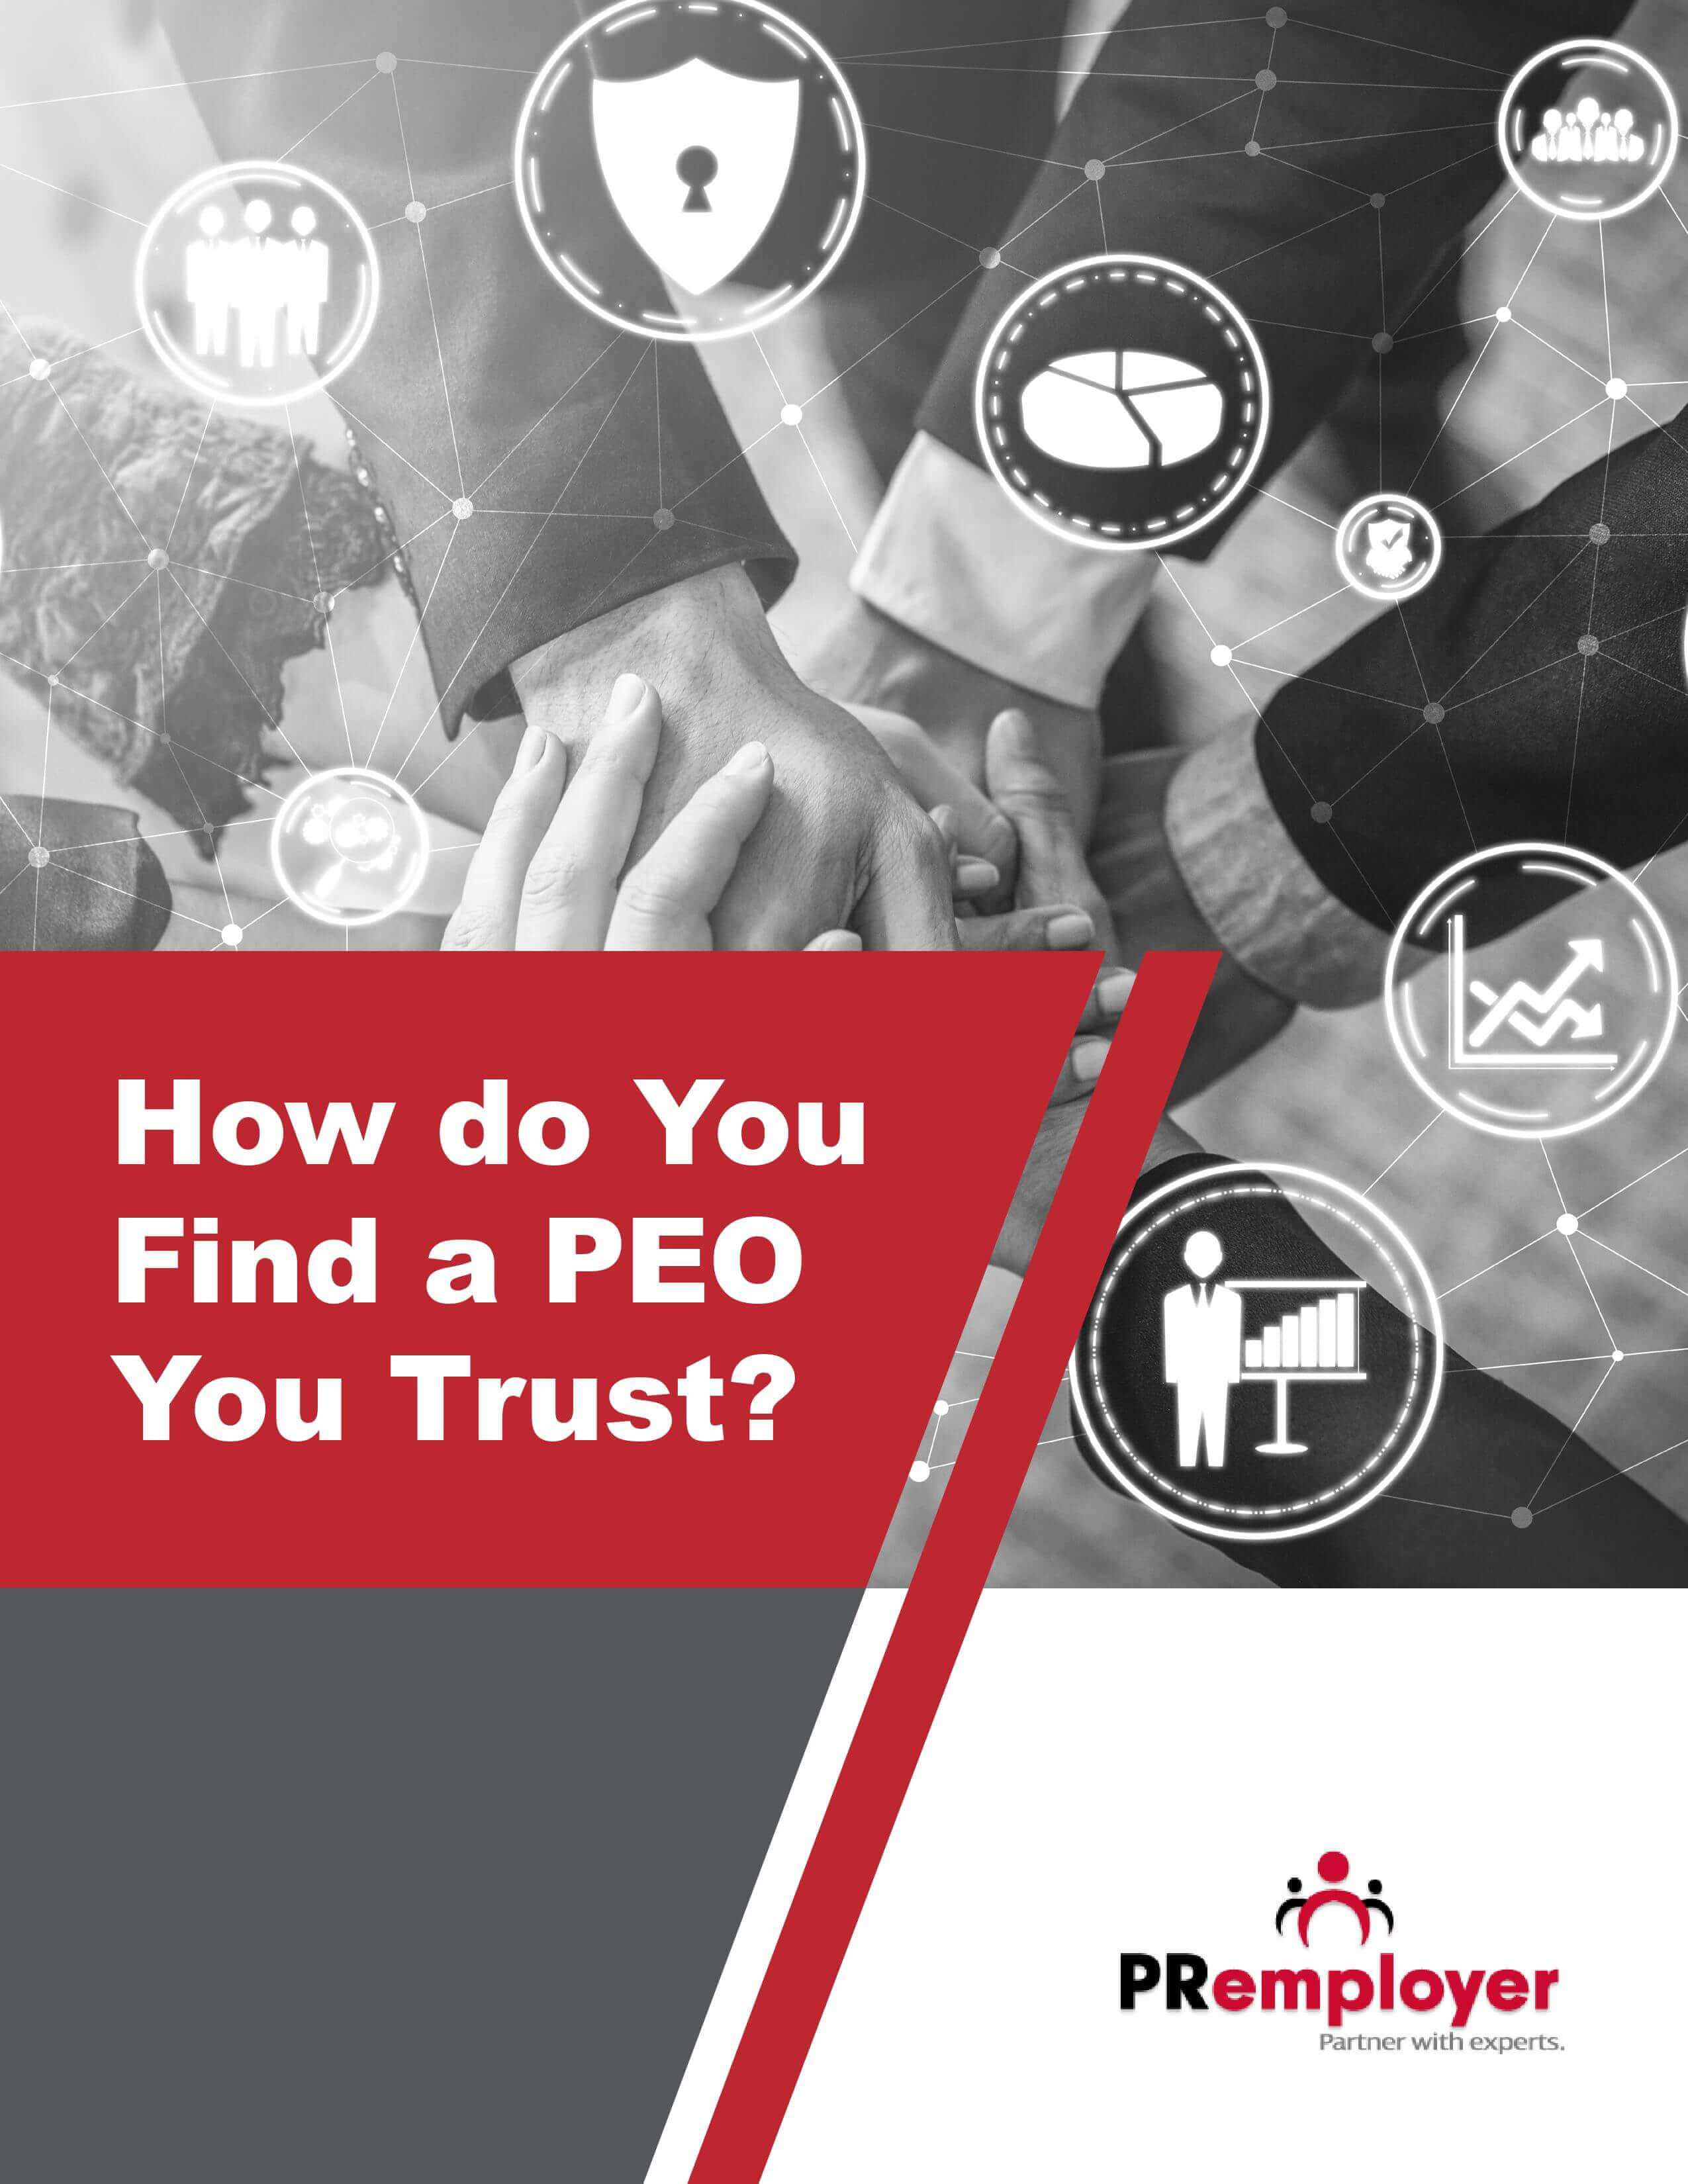 How to find PEO you trust